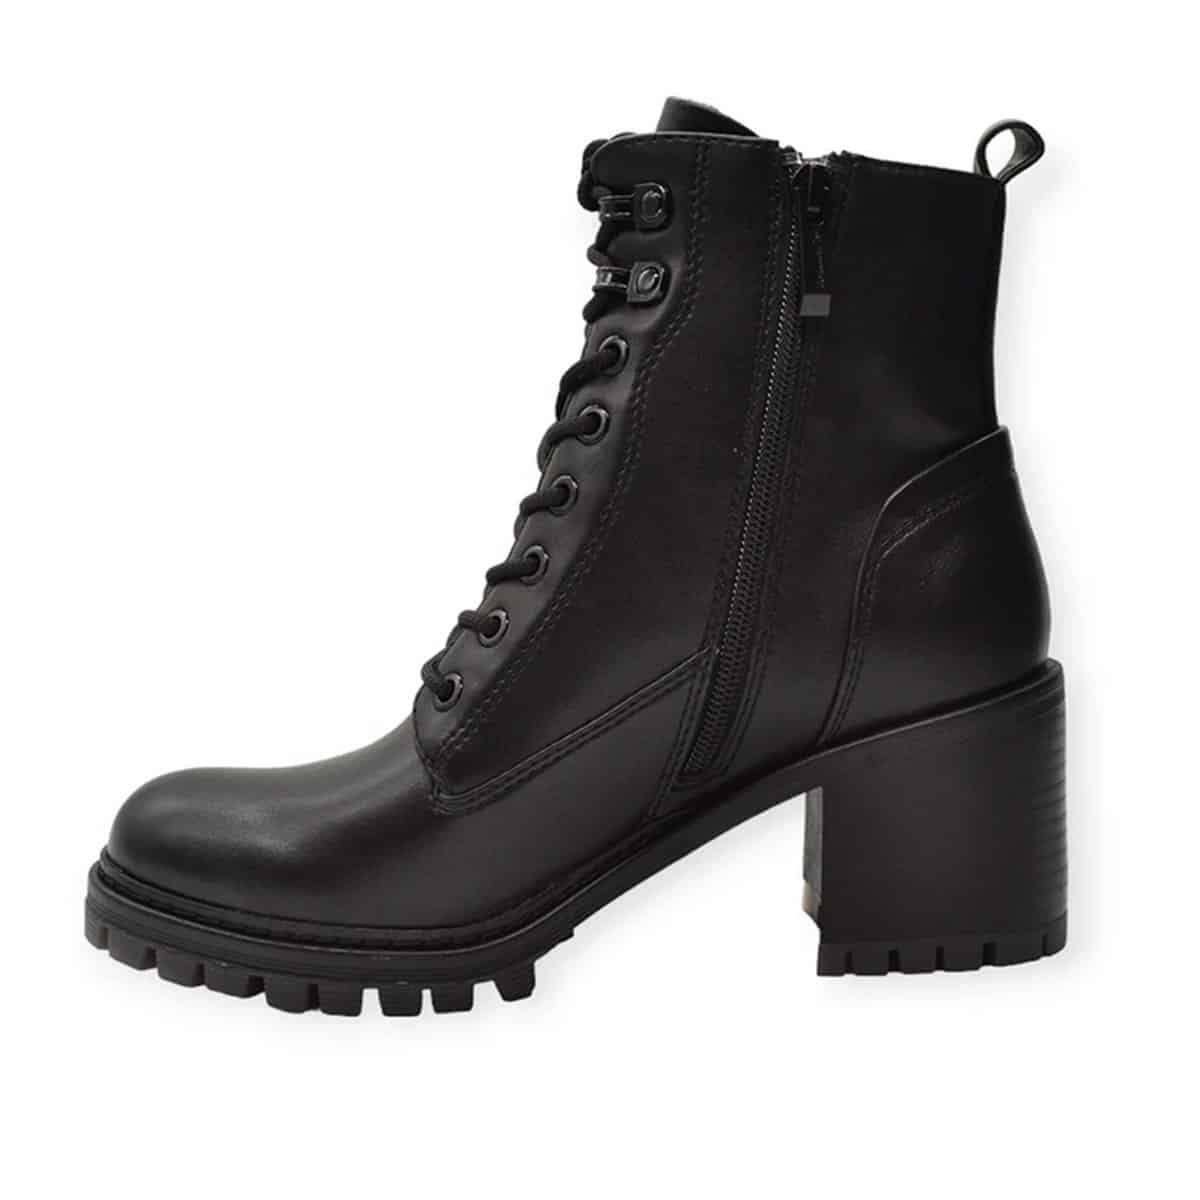 MIDDLE HEEL ARMY BOOTS WITH LACES 1-25271-41 020 TAMARIS BLACK